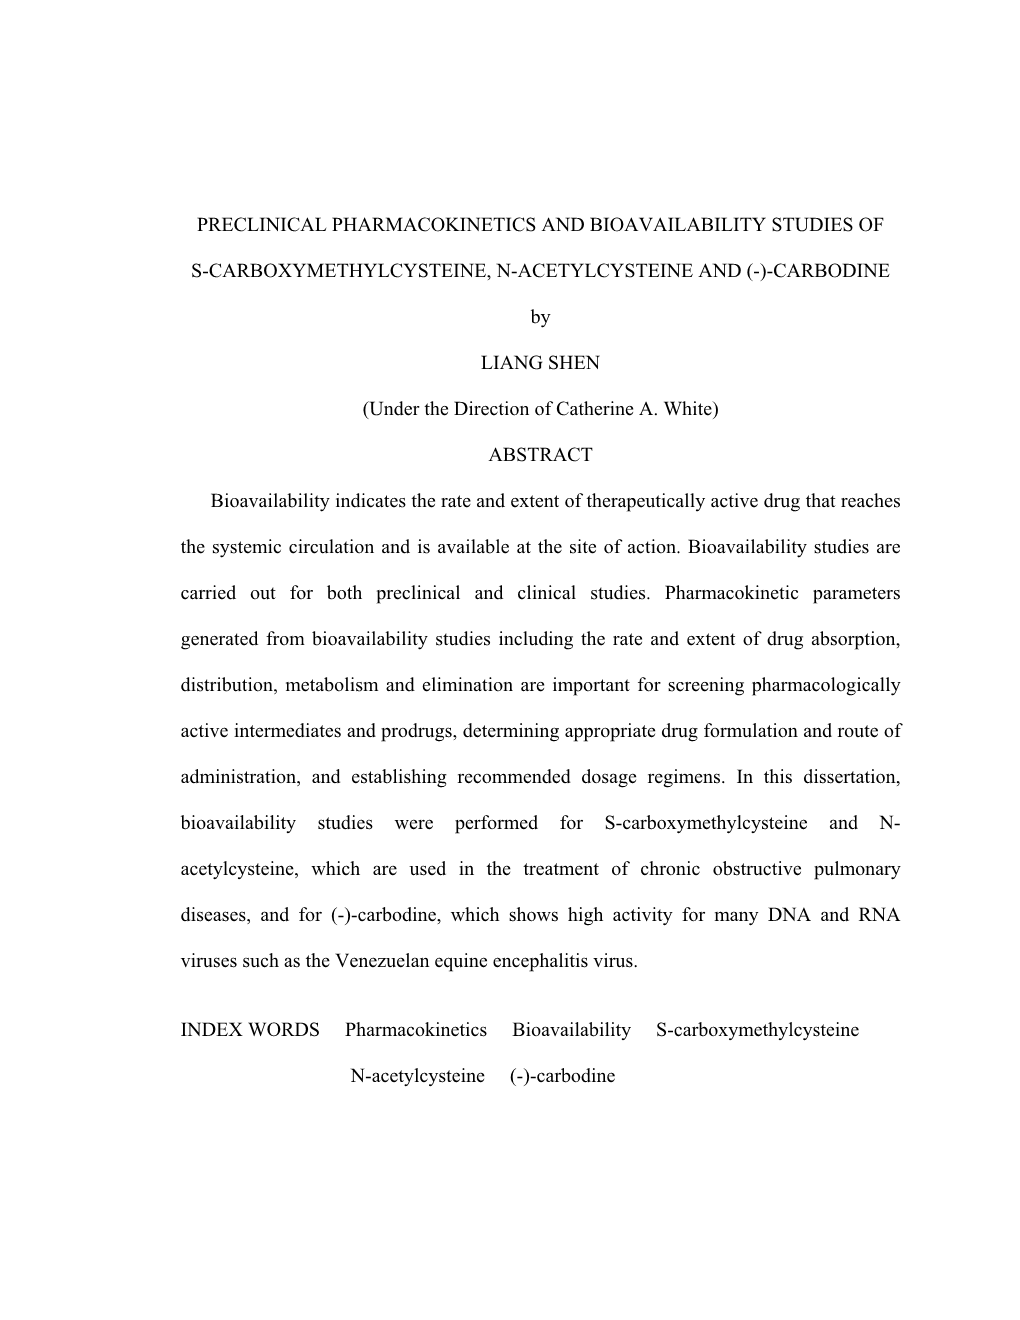 Preclinical Pharmacokinetics and Bioavailability Studies Of